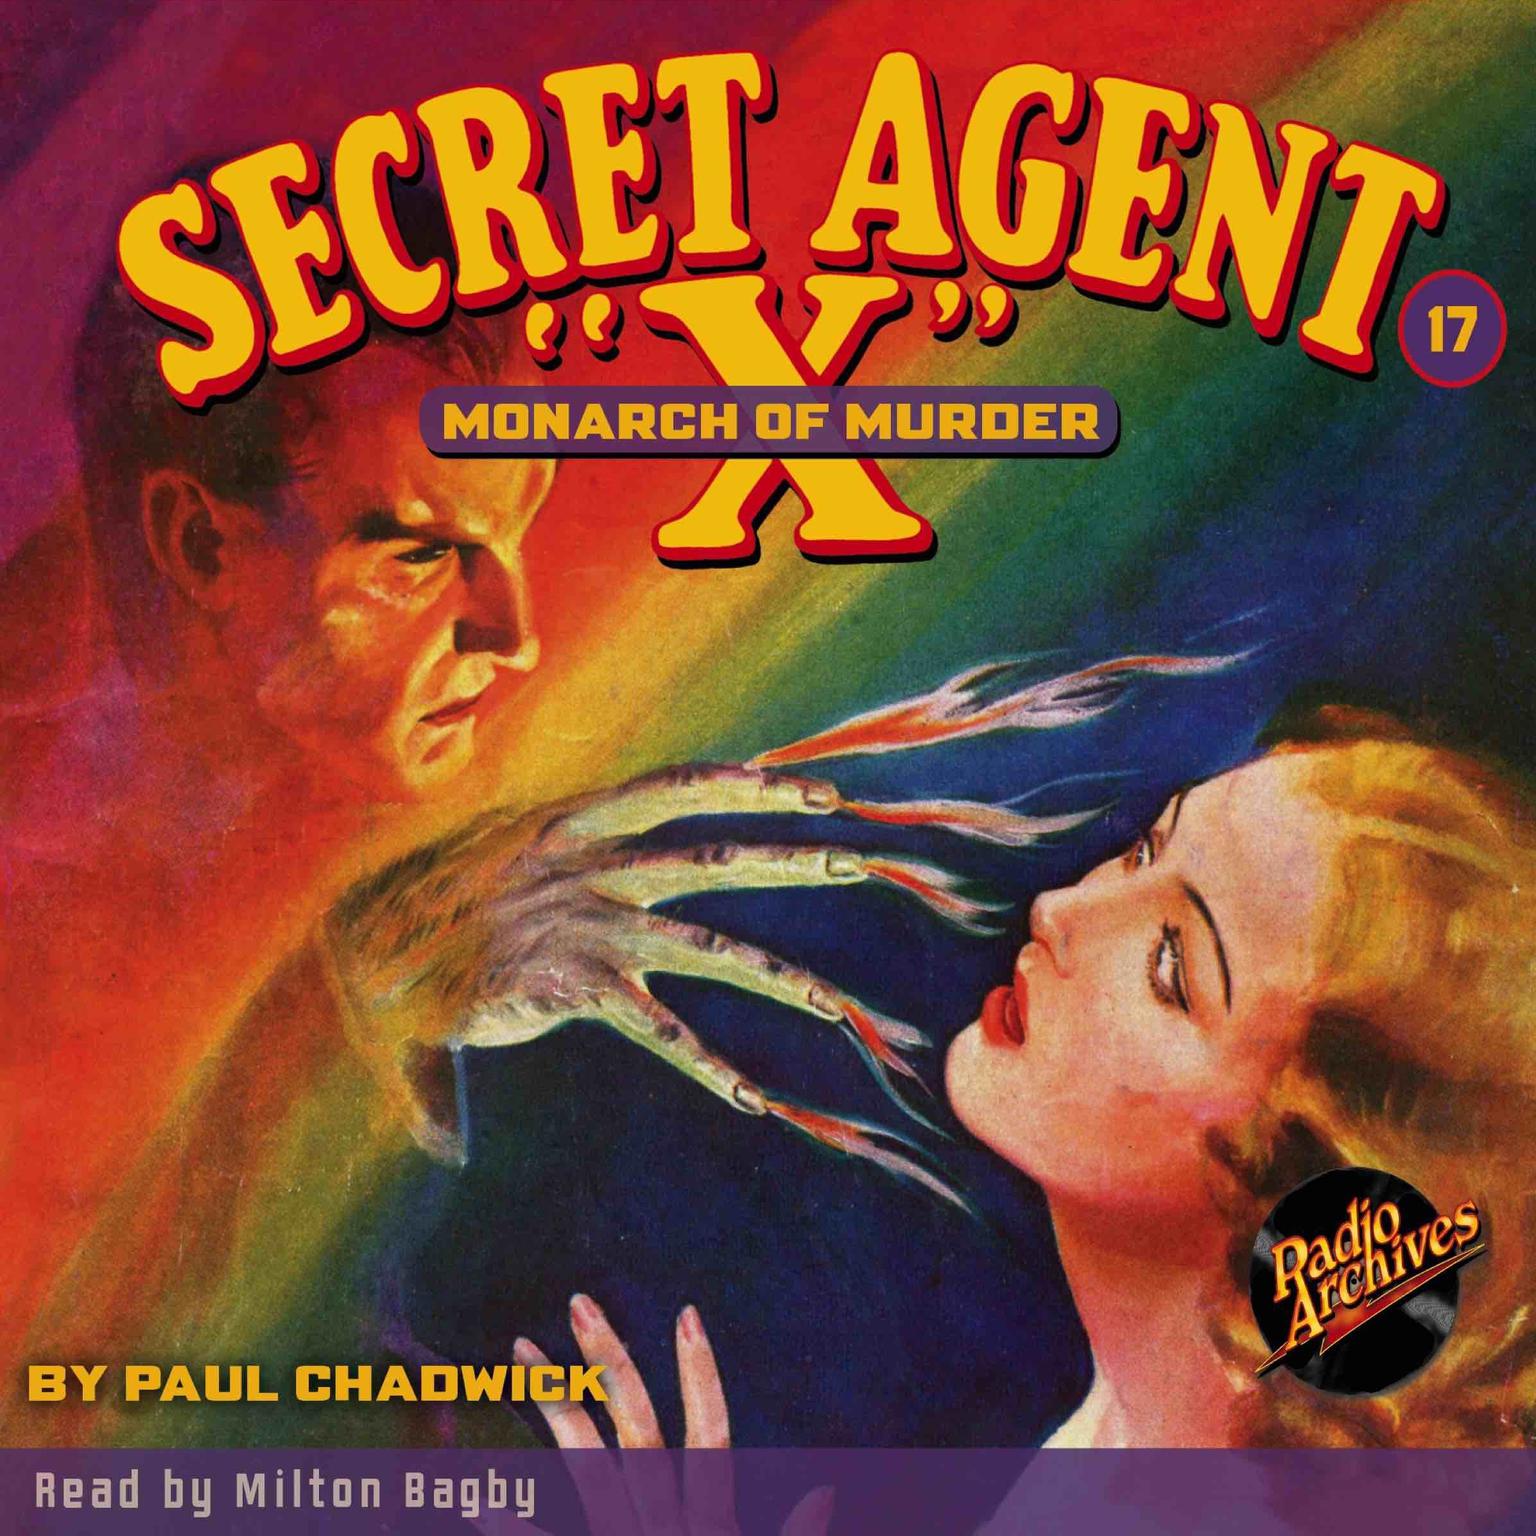 Secret Agent X: The Monarch of Murder Audiobook, by Paul Chadwick